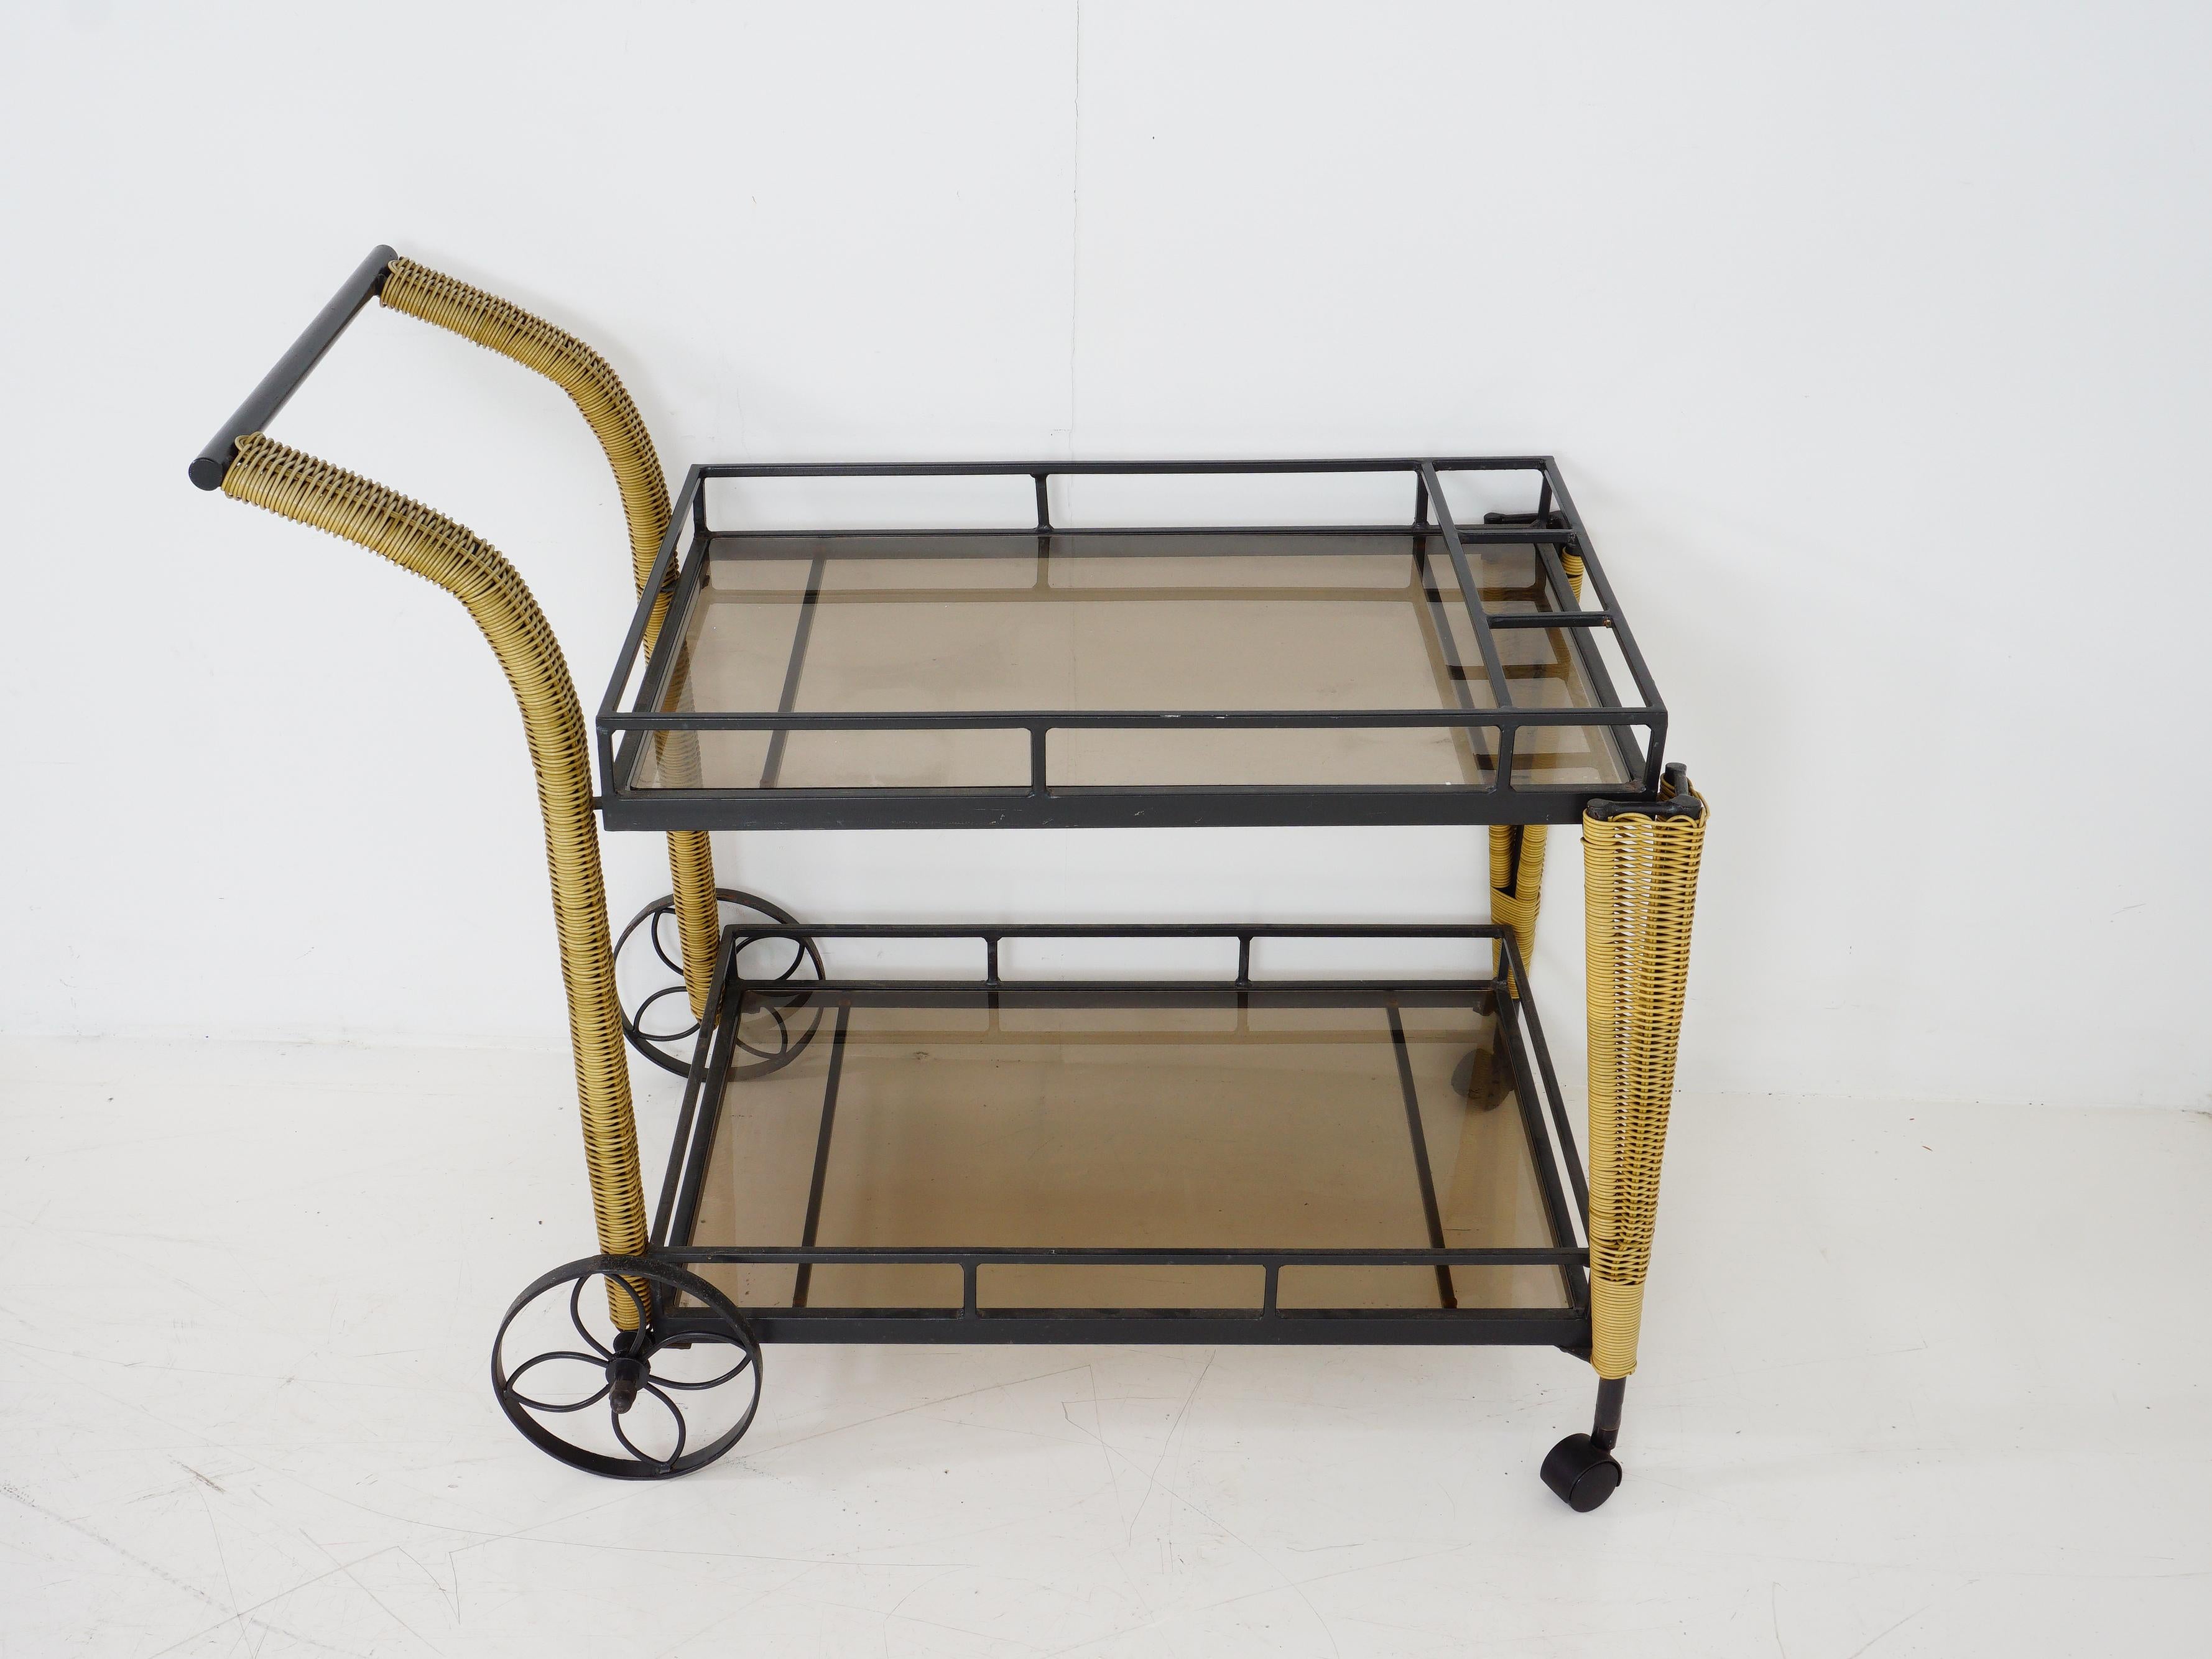 Swanky and mobile, this midcentury two-tier bar cart is the ultimate host with the most. Roll out the retro charm while you shake, stir, and serve in style.

- 35.25